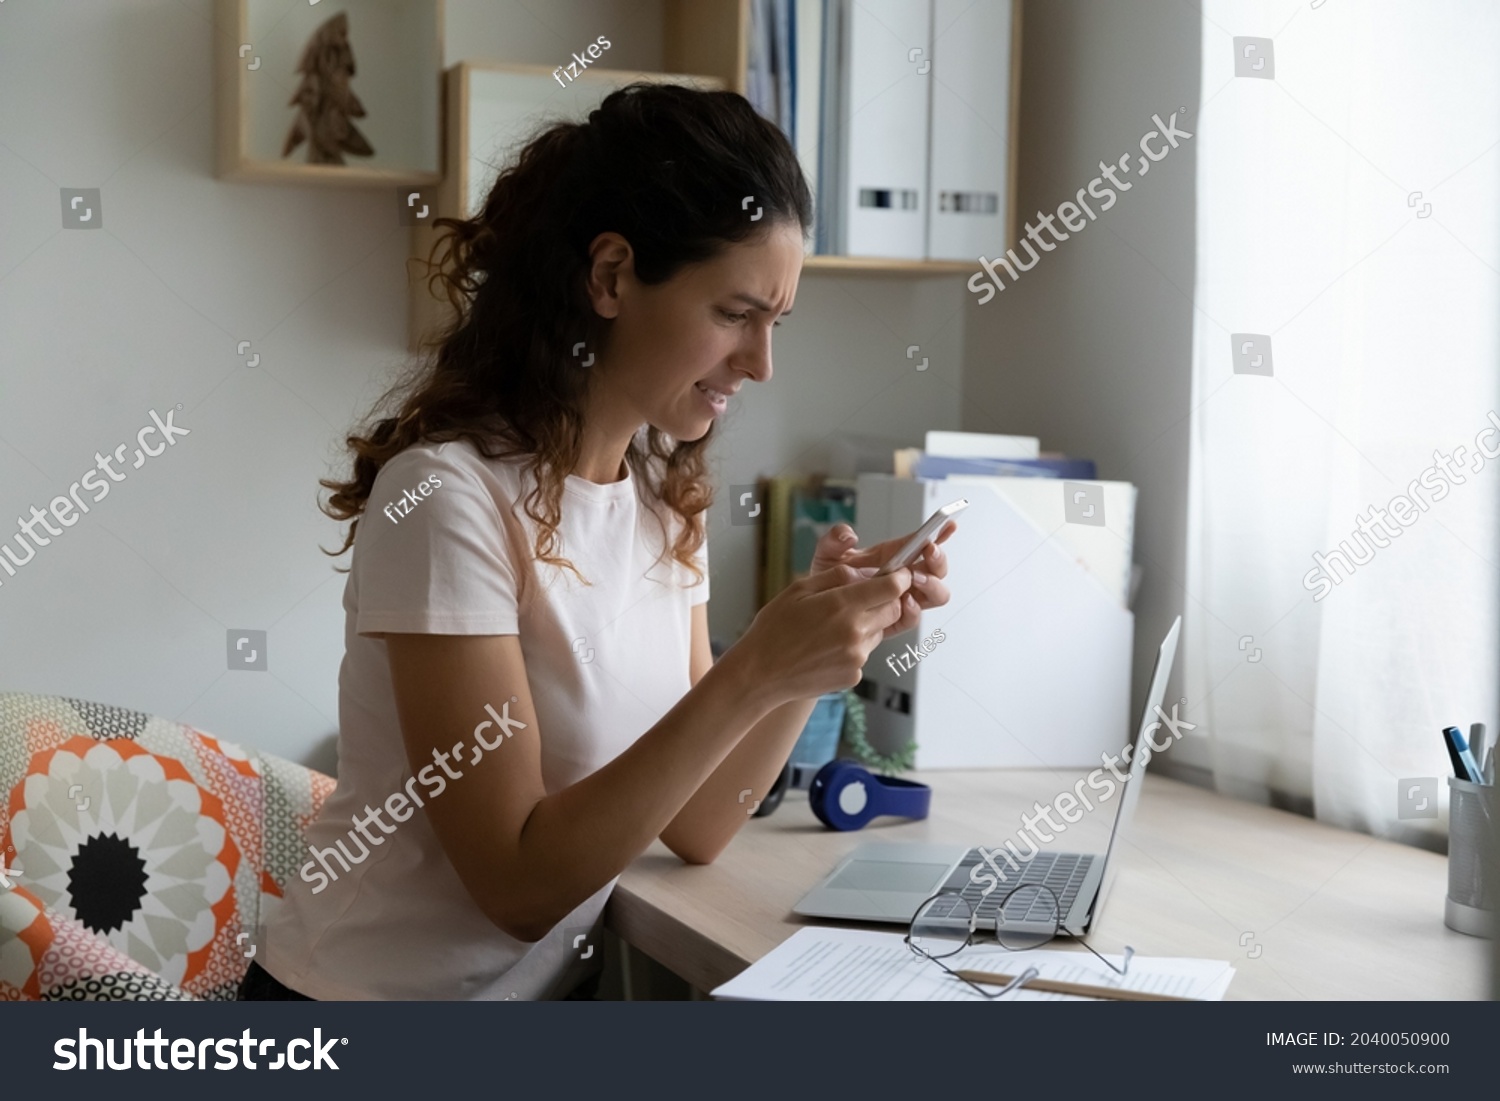 Irritated stressed woman sit at desk hold cellphone look at screen feels annoyed due spam, missed call, crashed app, bad business news, problems with not working, discharged or broken device concept #2040050900